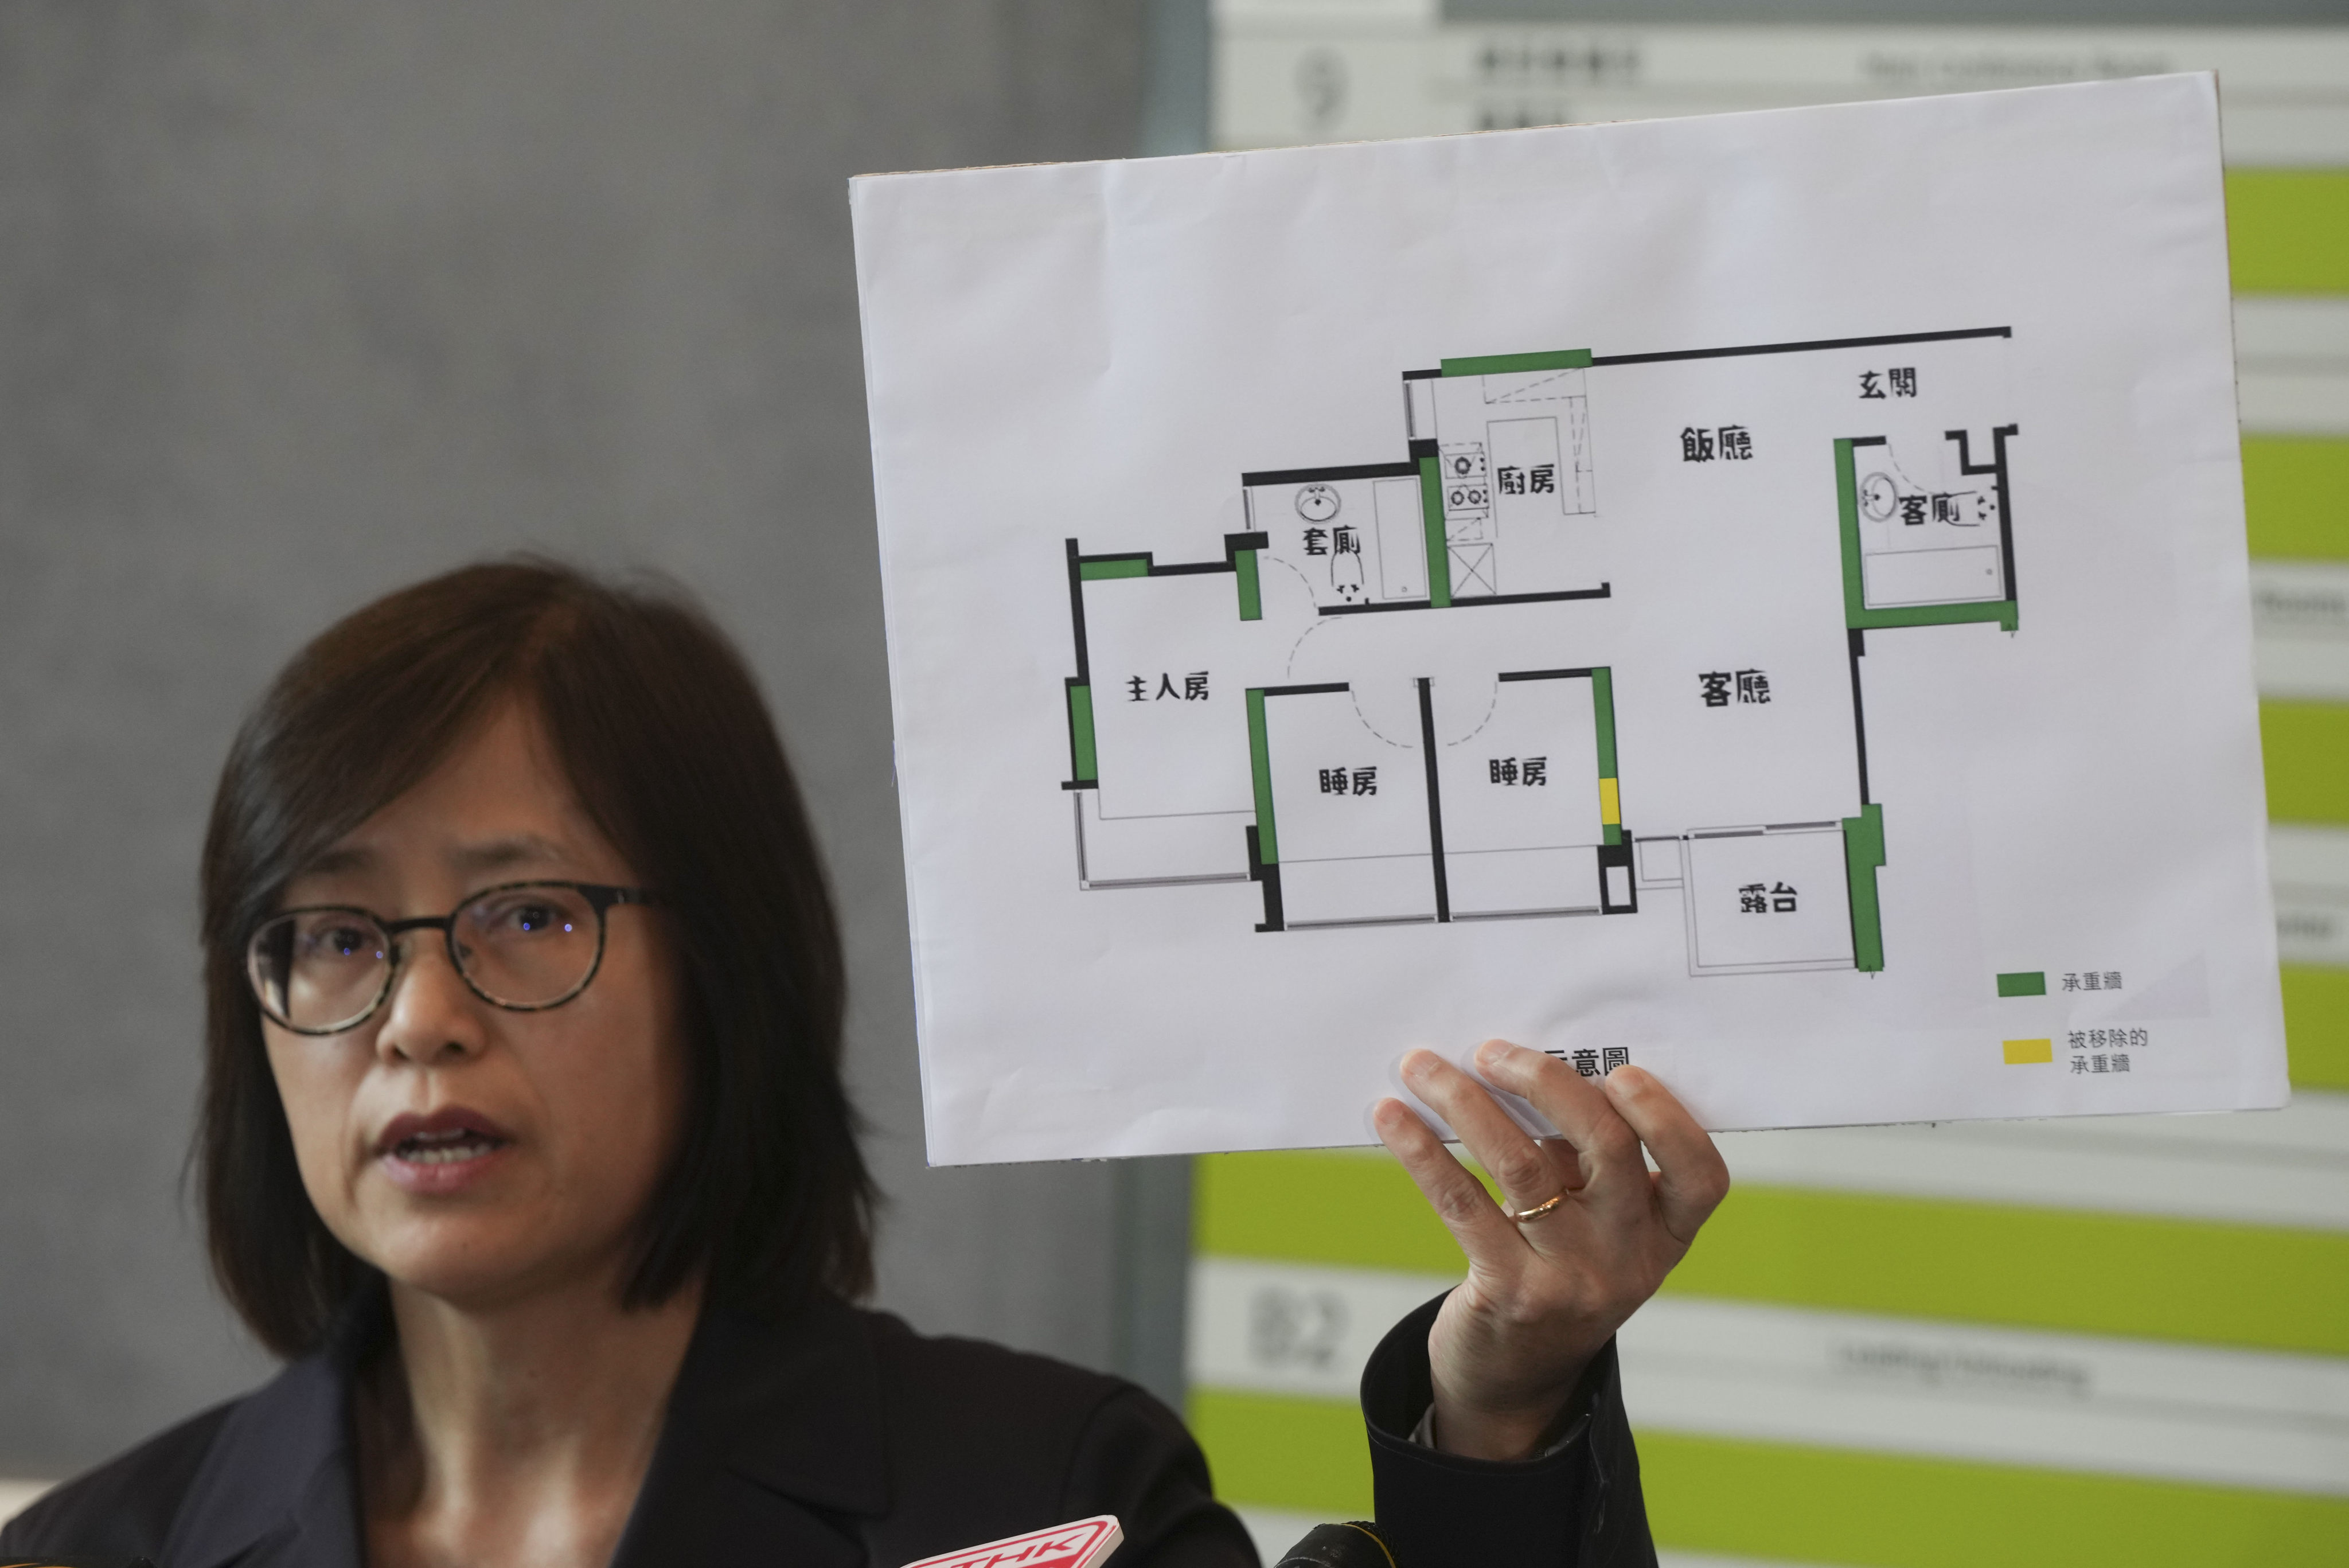 Director of Buildings Clarice Yu Po-mei speaks to reporters on May 30 about the Lohas Park flat where part of a structural wall was removed without approval. Photo: Sam Tsang